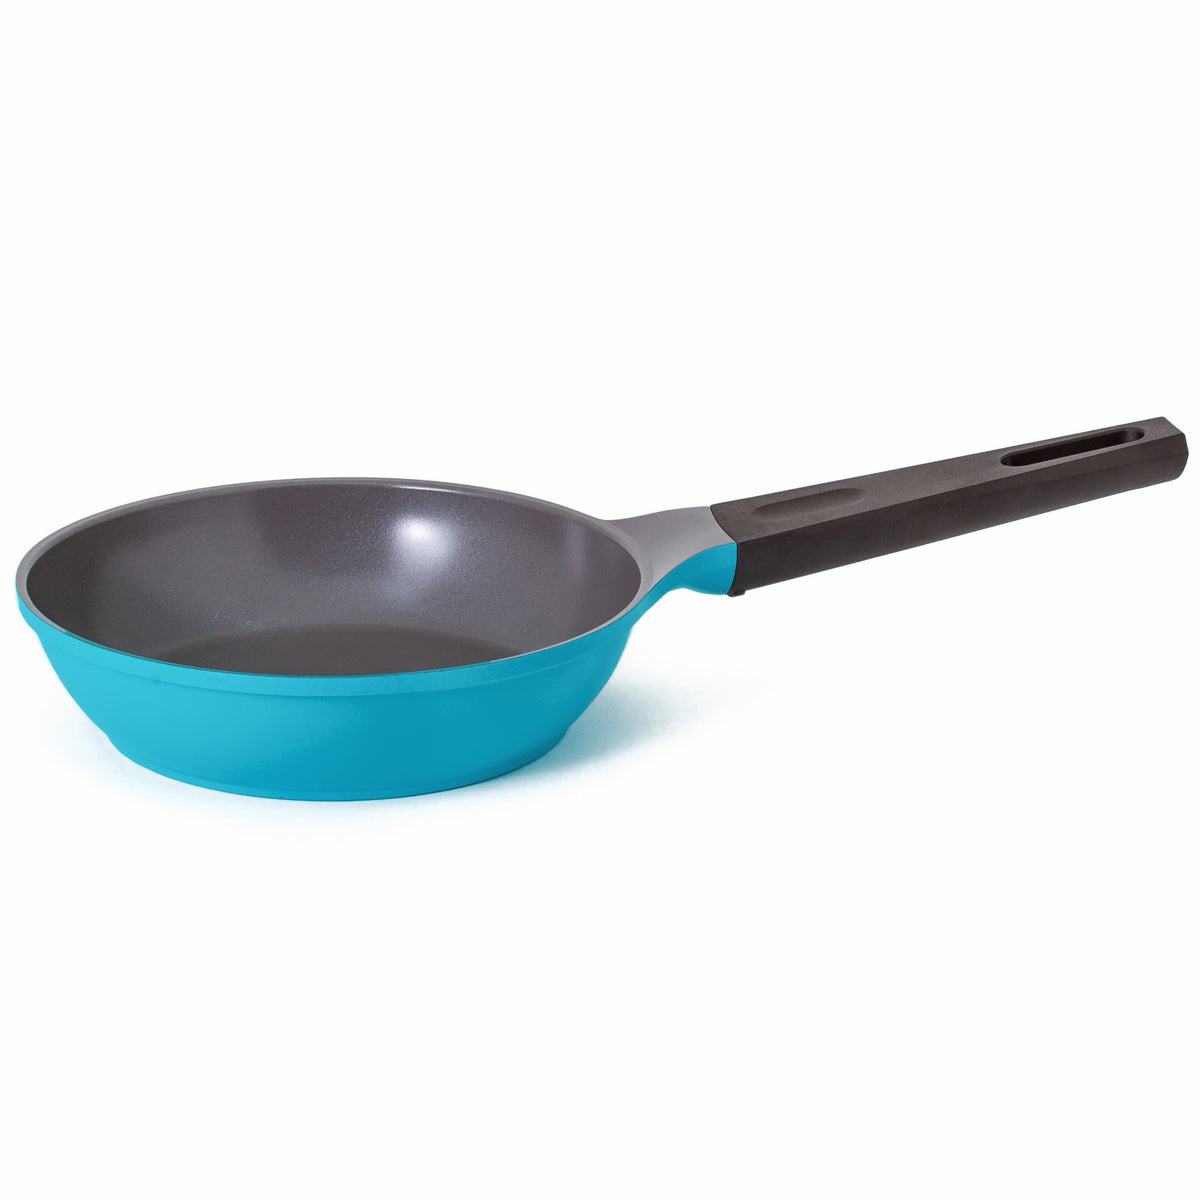 Neoflam Nature+ 20cm 24cm 28cm Induction Fry Pan